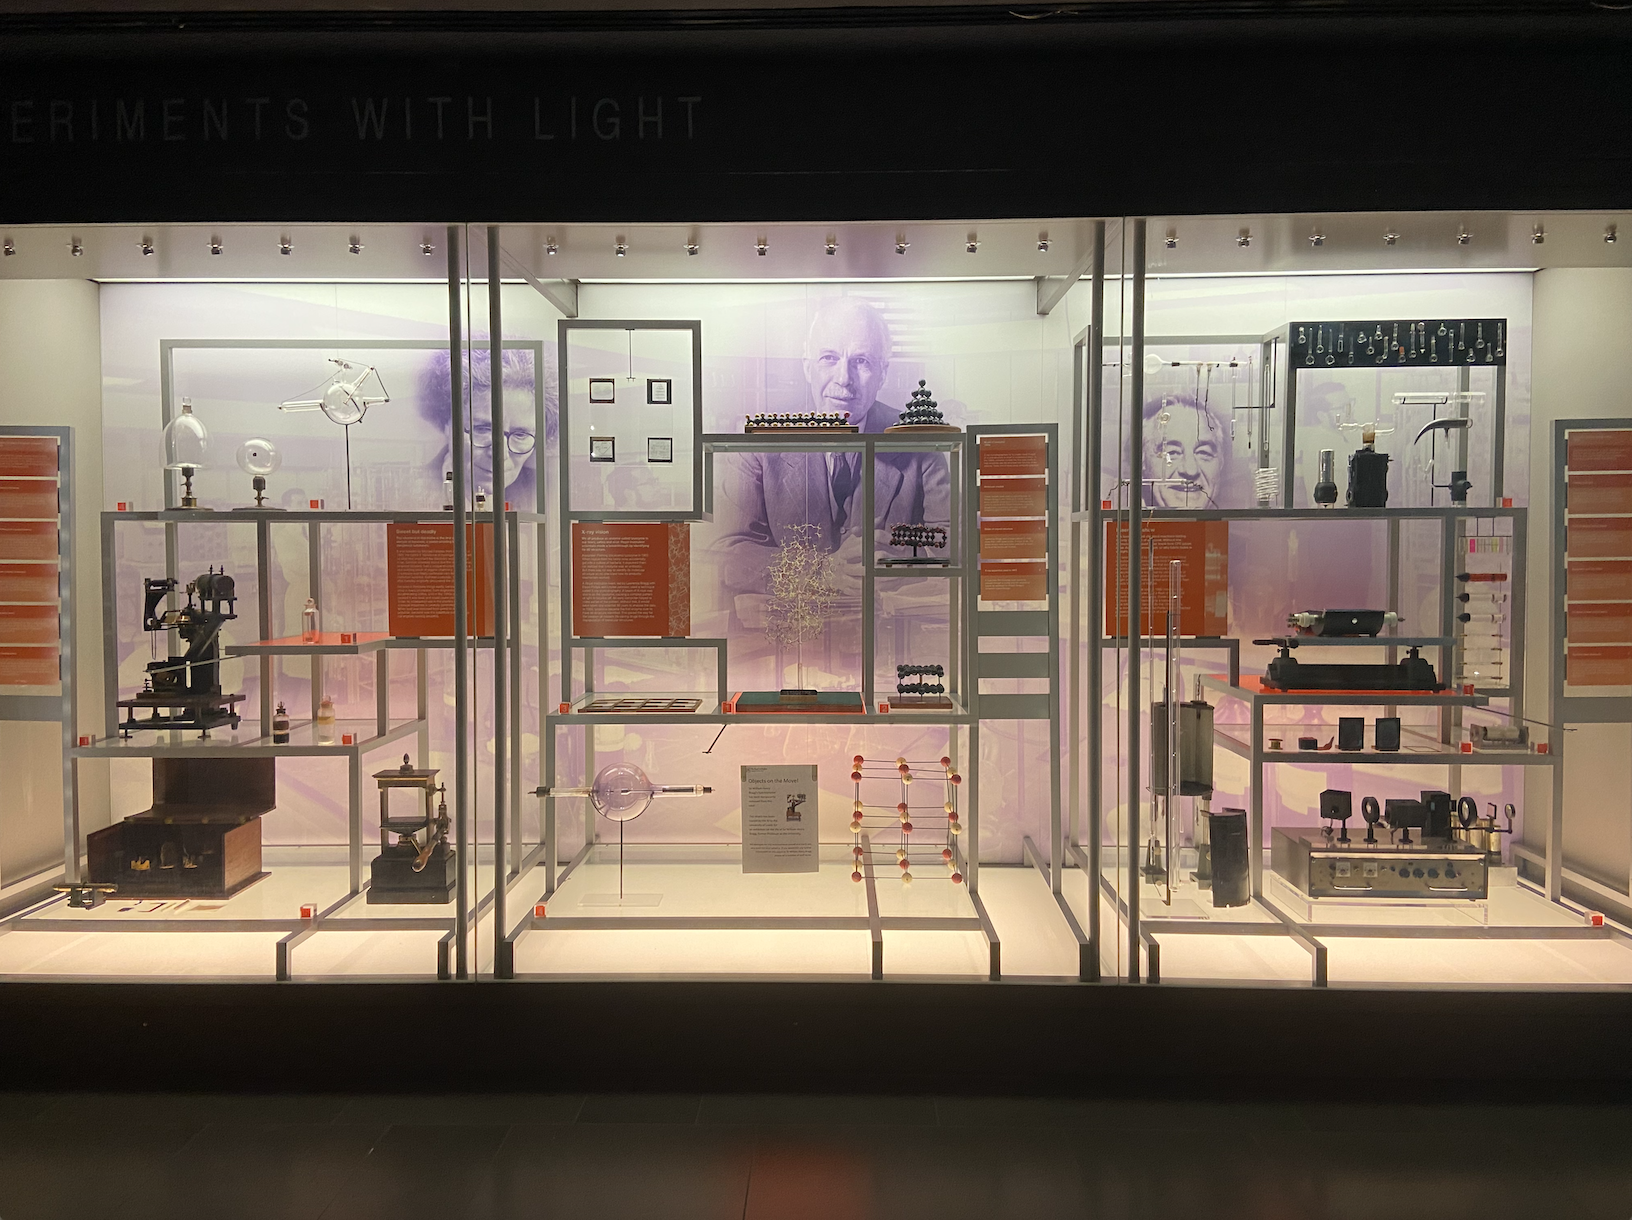 Lots of scientific equipment behind glass panes in three sections, white walls with three purple pictures of scientists, clear flooring, 16 orange rectangular captions, three orange square captions and metal shelving